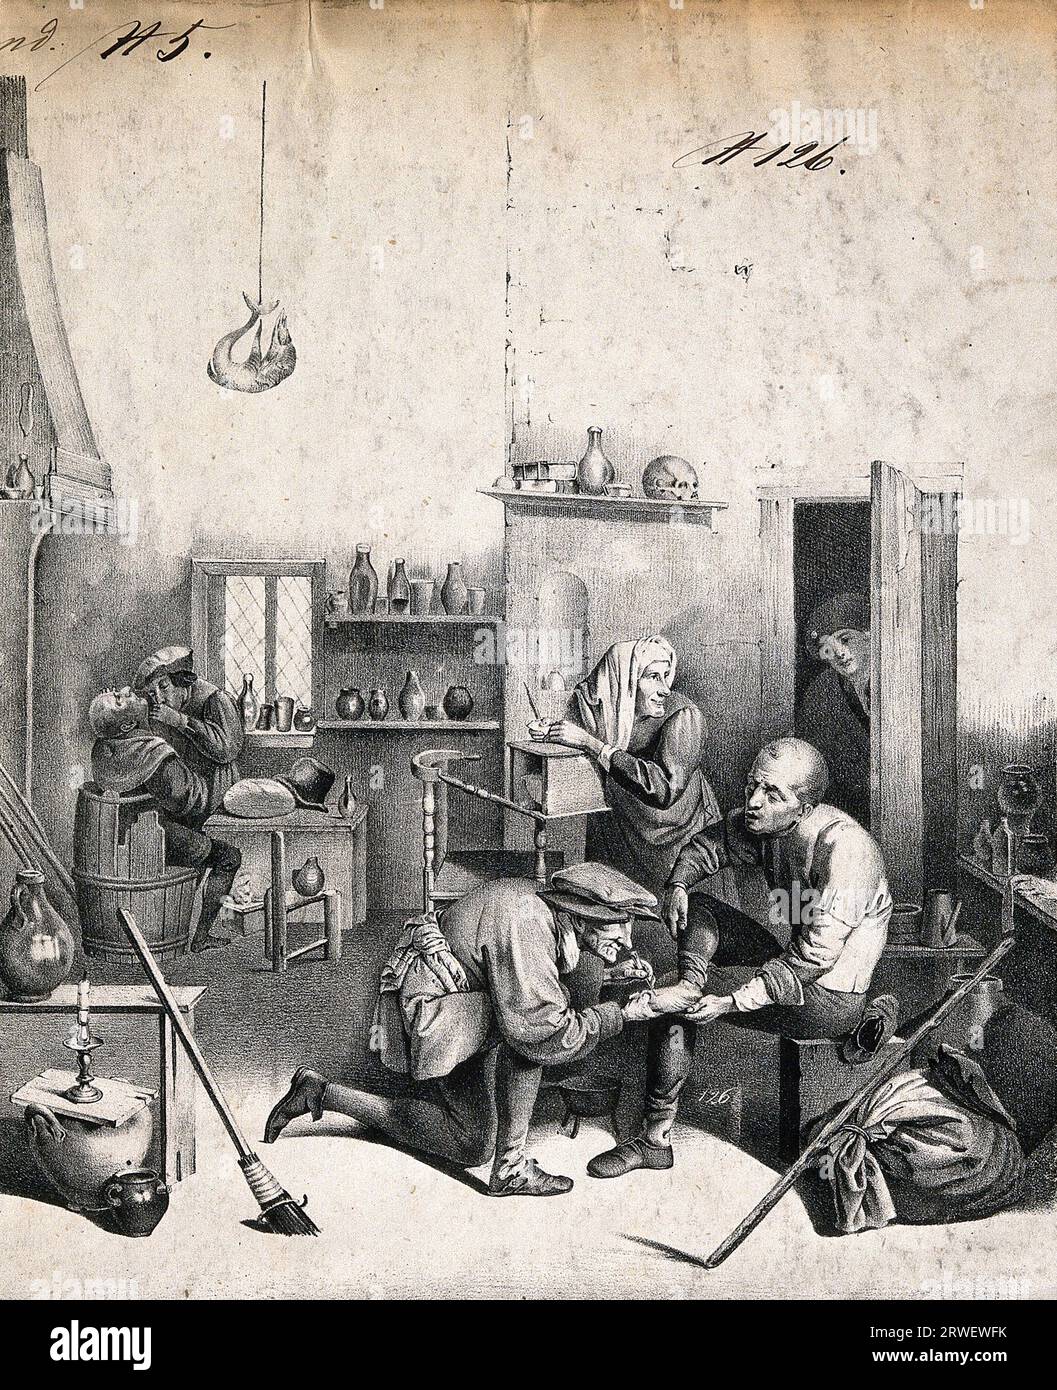 A surgeon treats a patient's foot, in the background another surgeon examines a patient in a surgery, Surgical instruments and apparatus, Medical bottles, 17th century treatment, Netherlands, Historic, digitally restored reproduction from a 19th century original Stock Photo